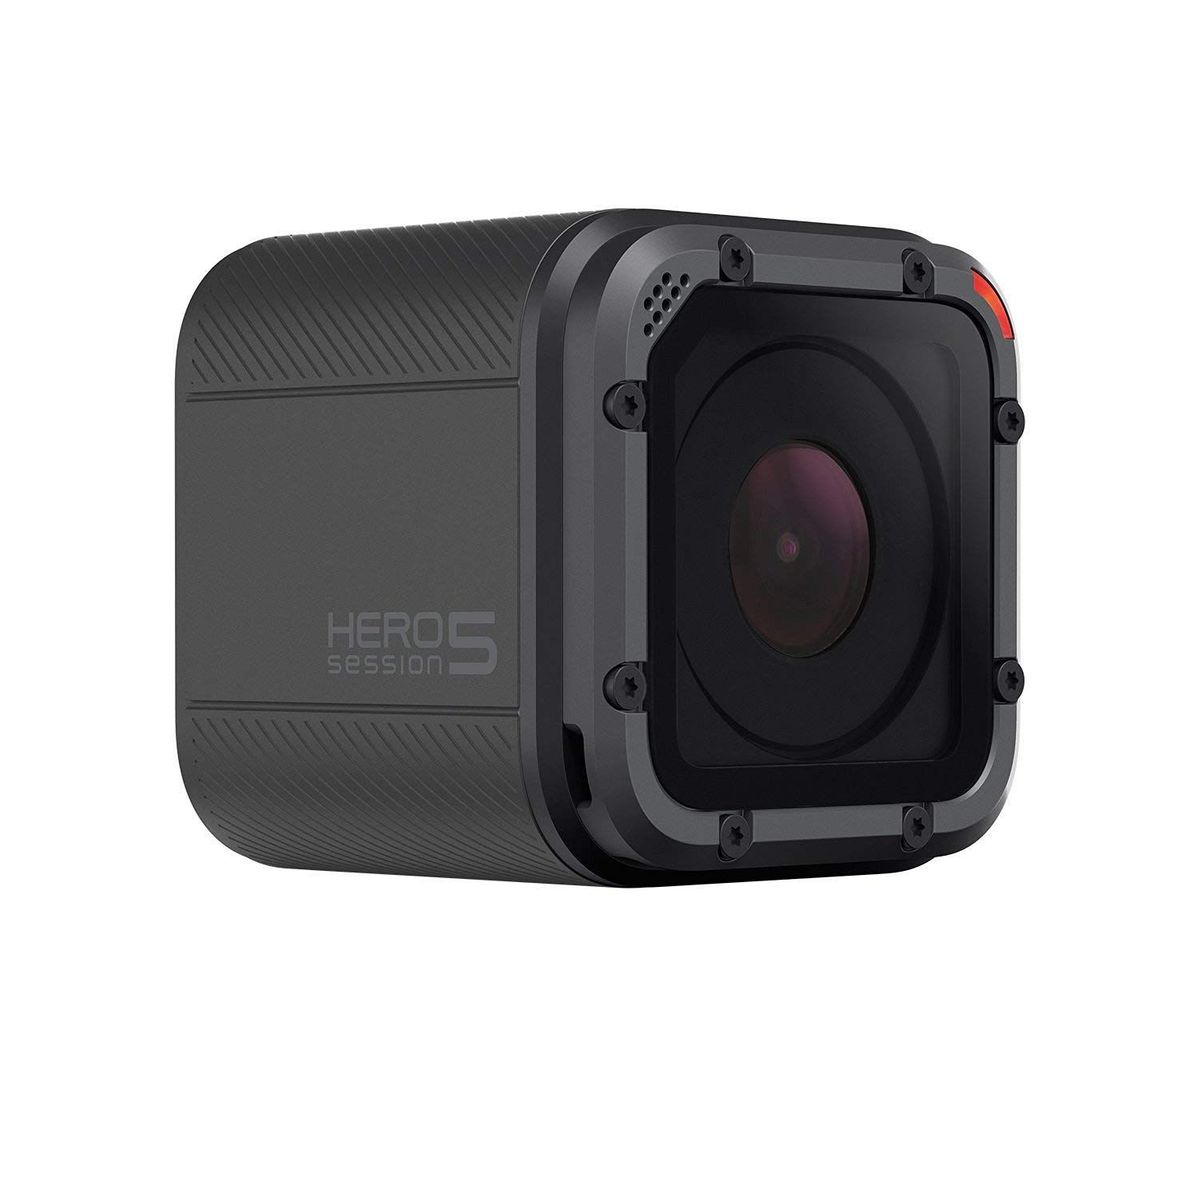 GoPro Hero 5 Session Action Camera Best Price in India 2021, Specs